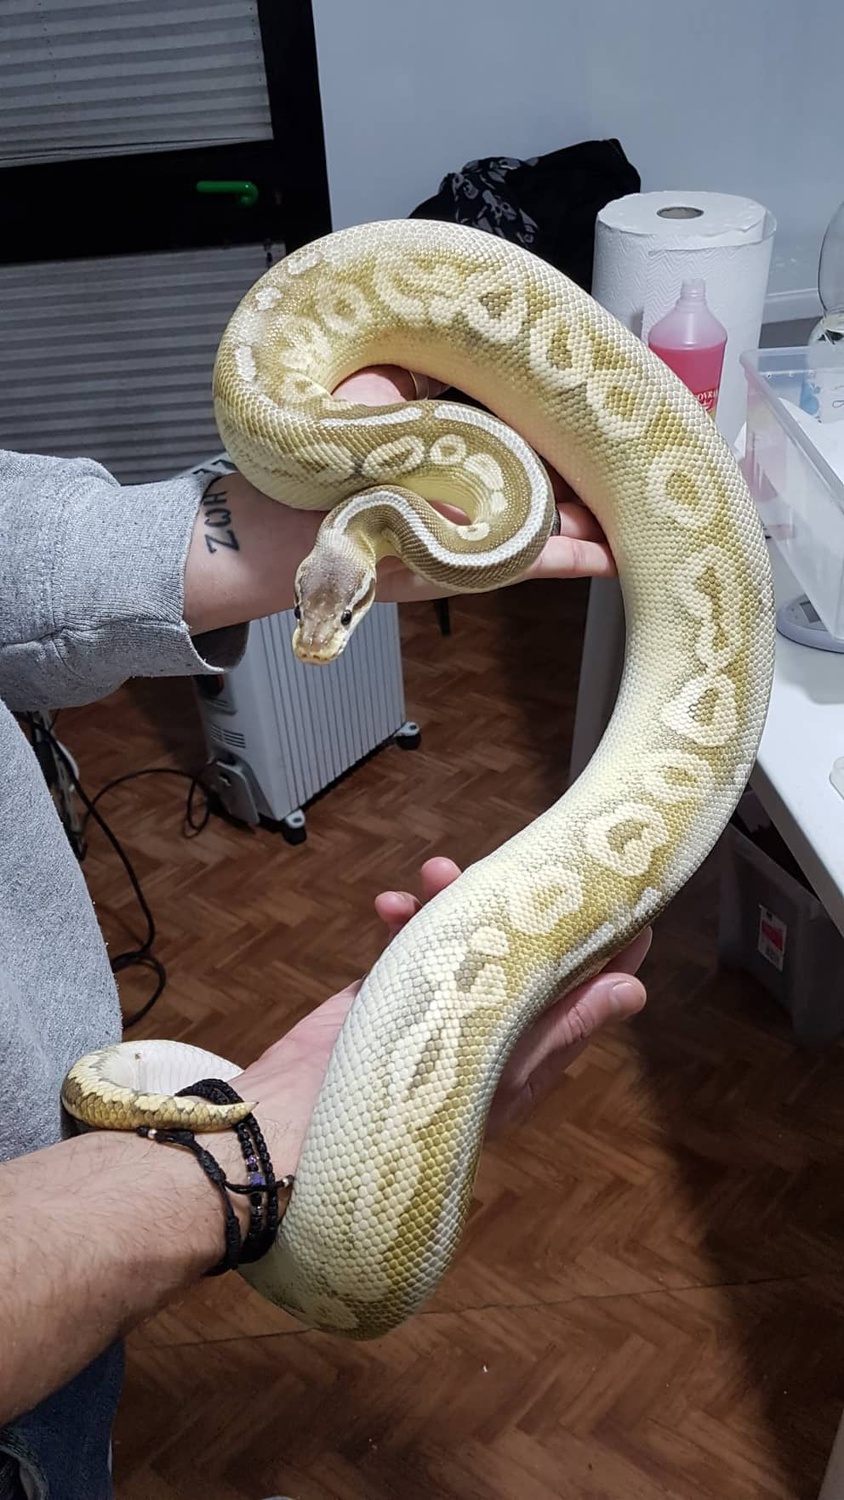 Epic Sterling Mojave Het Ghost Ball Python by The-snakes Garage